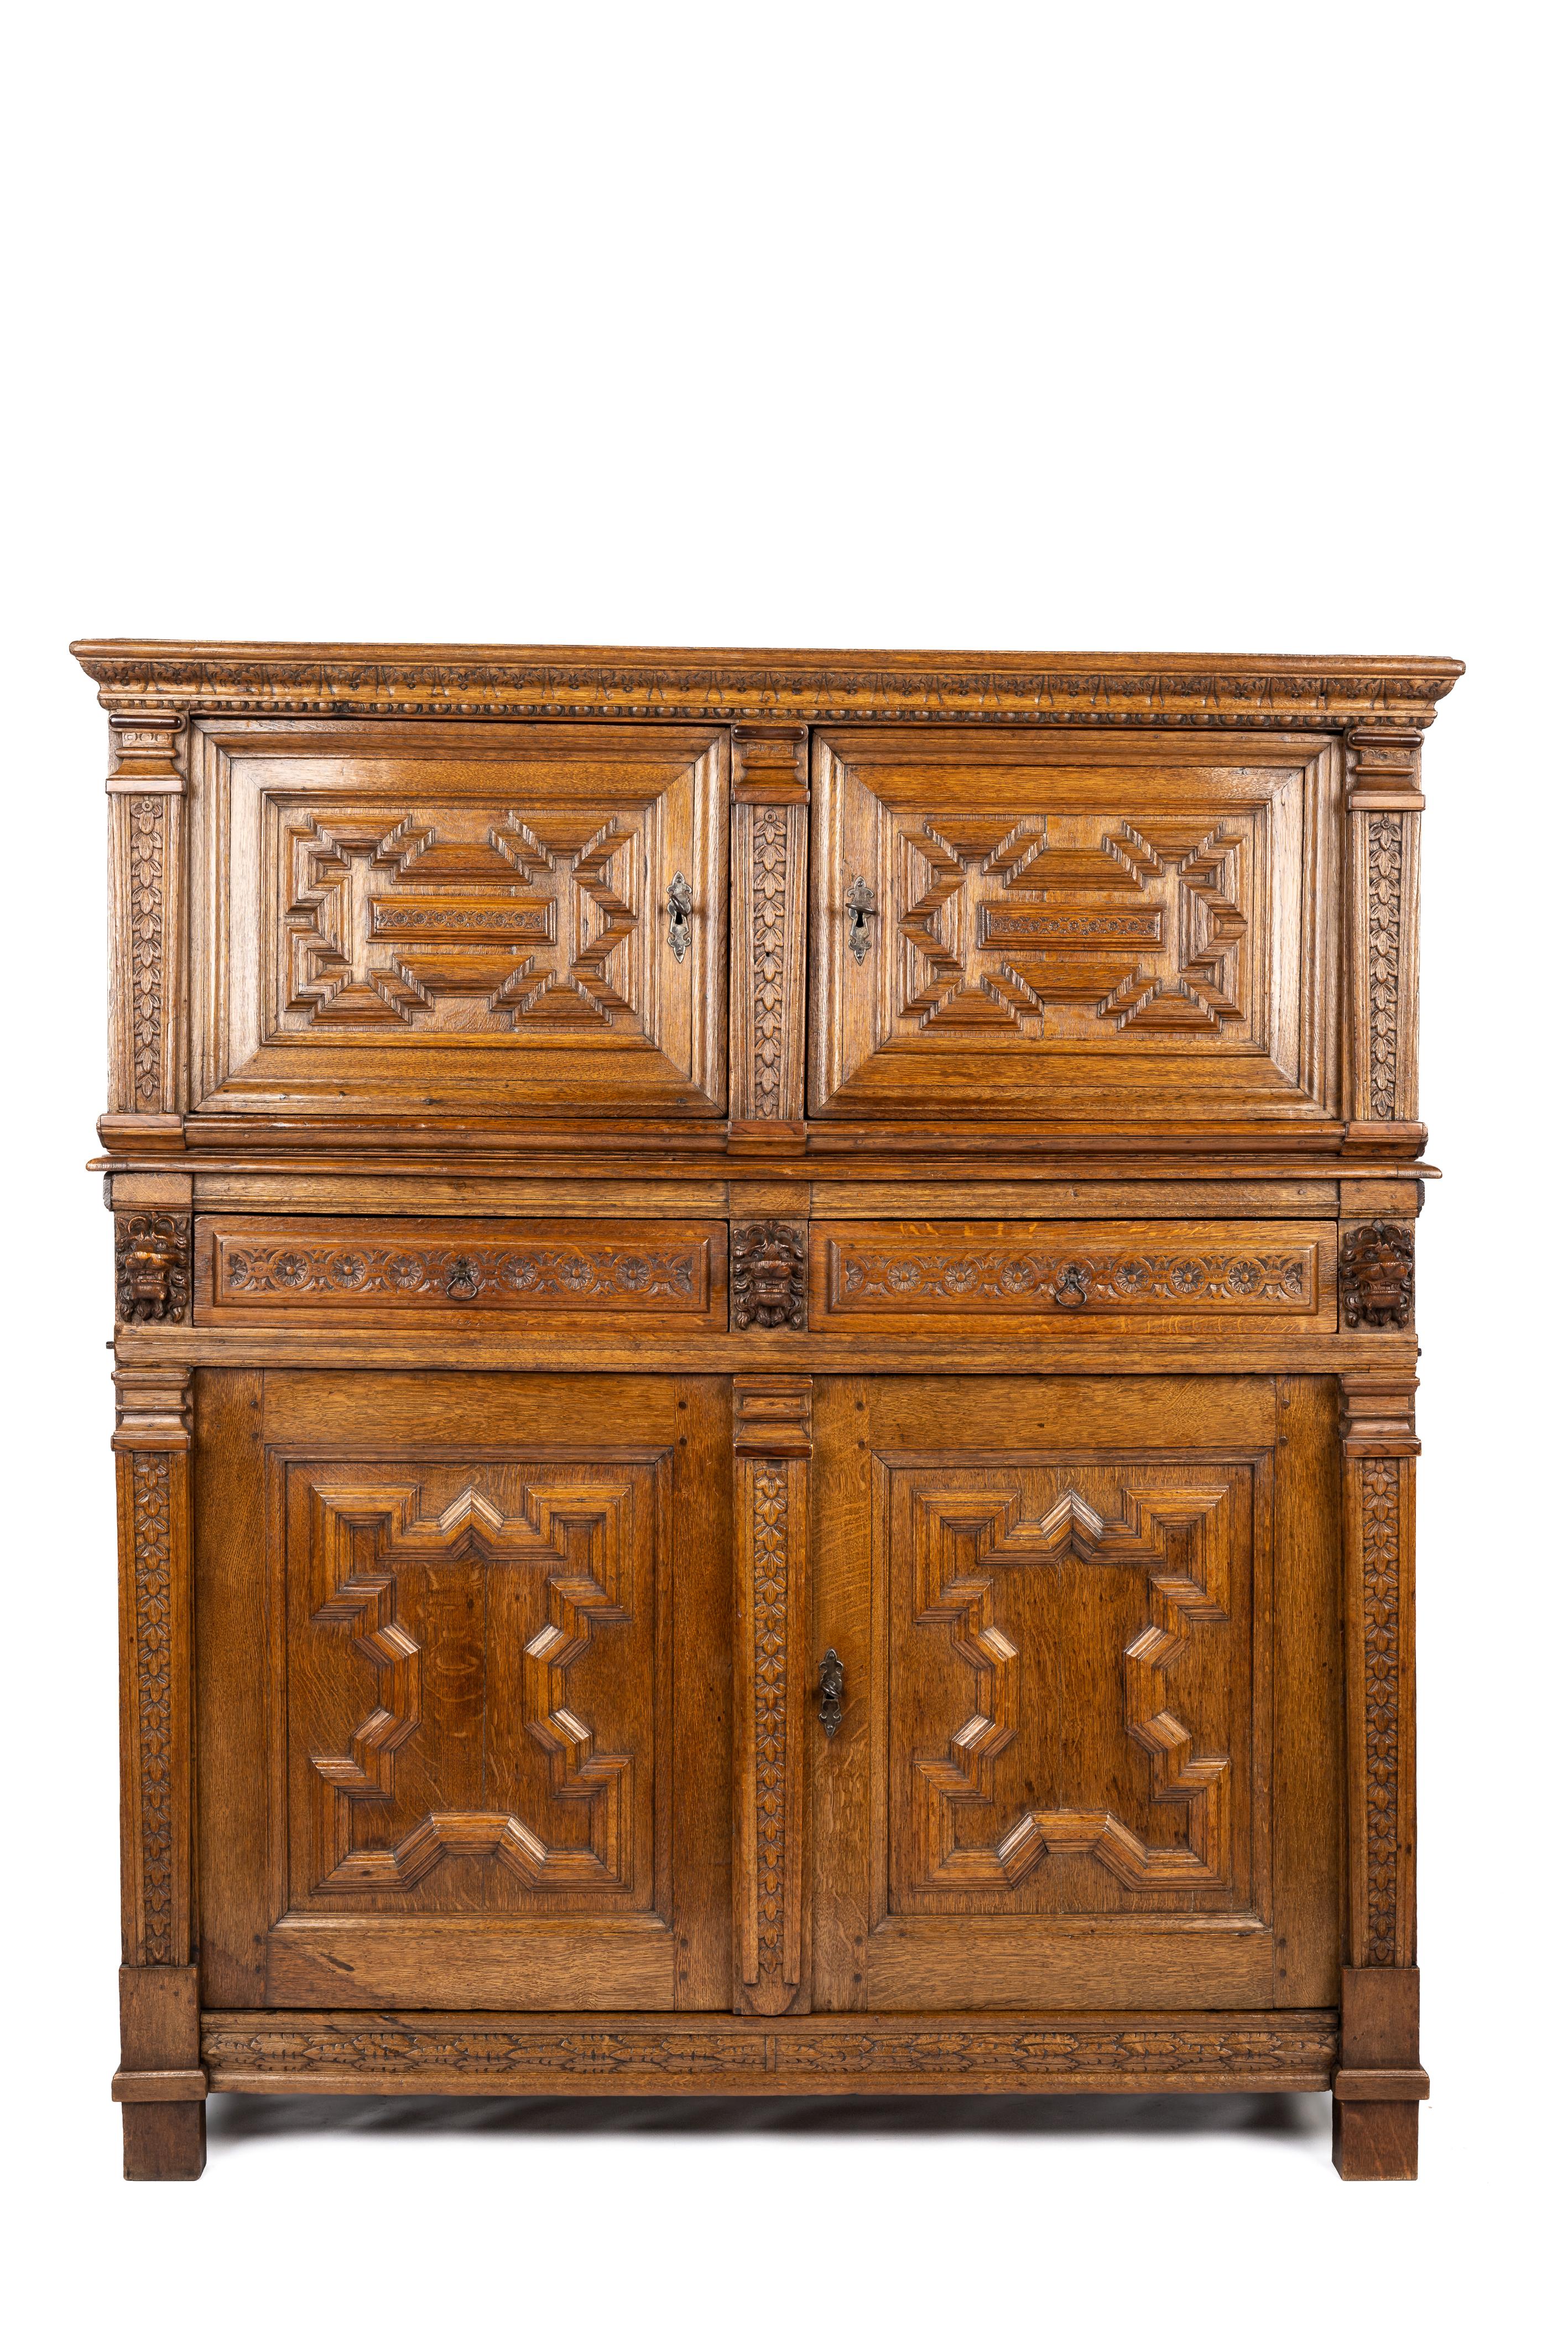 This fantastic two-piece 17th-century oak cupboard was made in Antwerp, Flanders, circa 1680. It consists of two pieces, a lower and an upper cabinet. The lower cabinet can be used without the upper cabinet and is finished accordingly. The cabinet